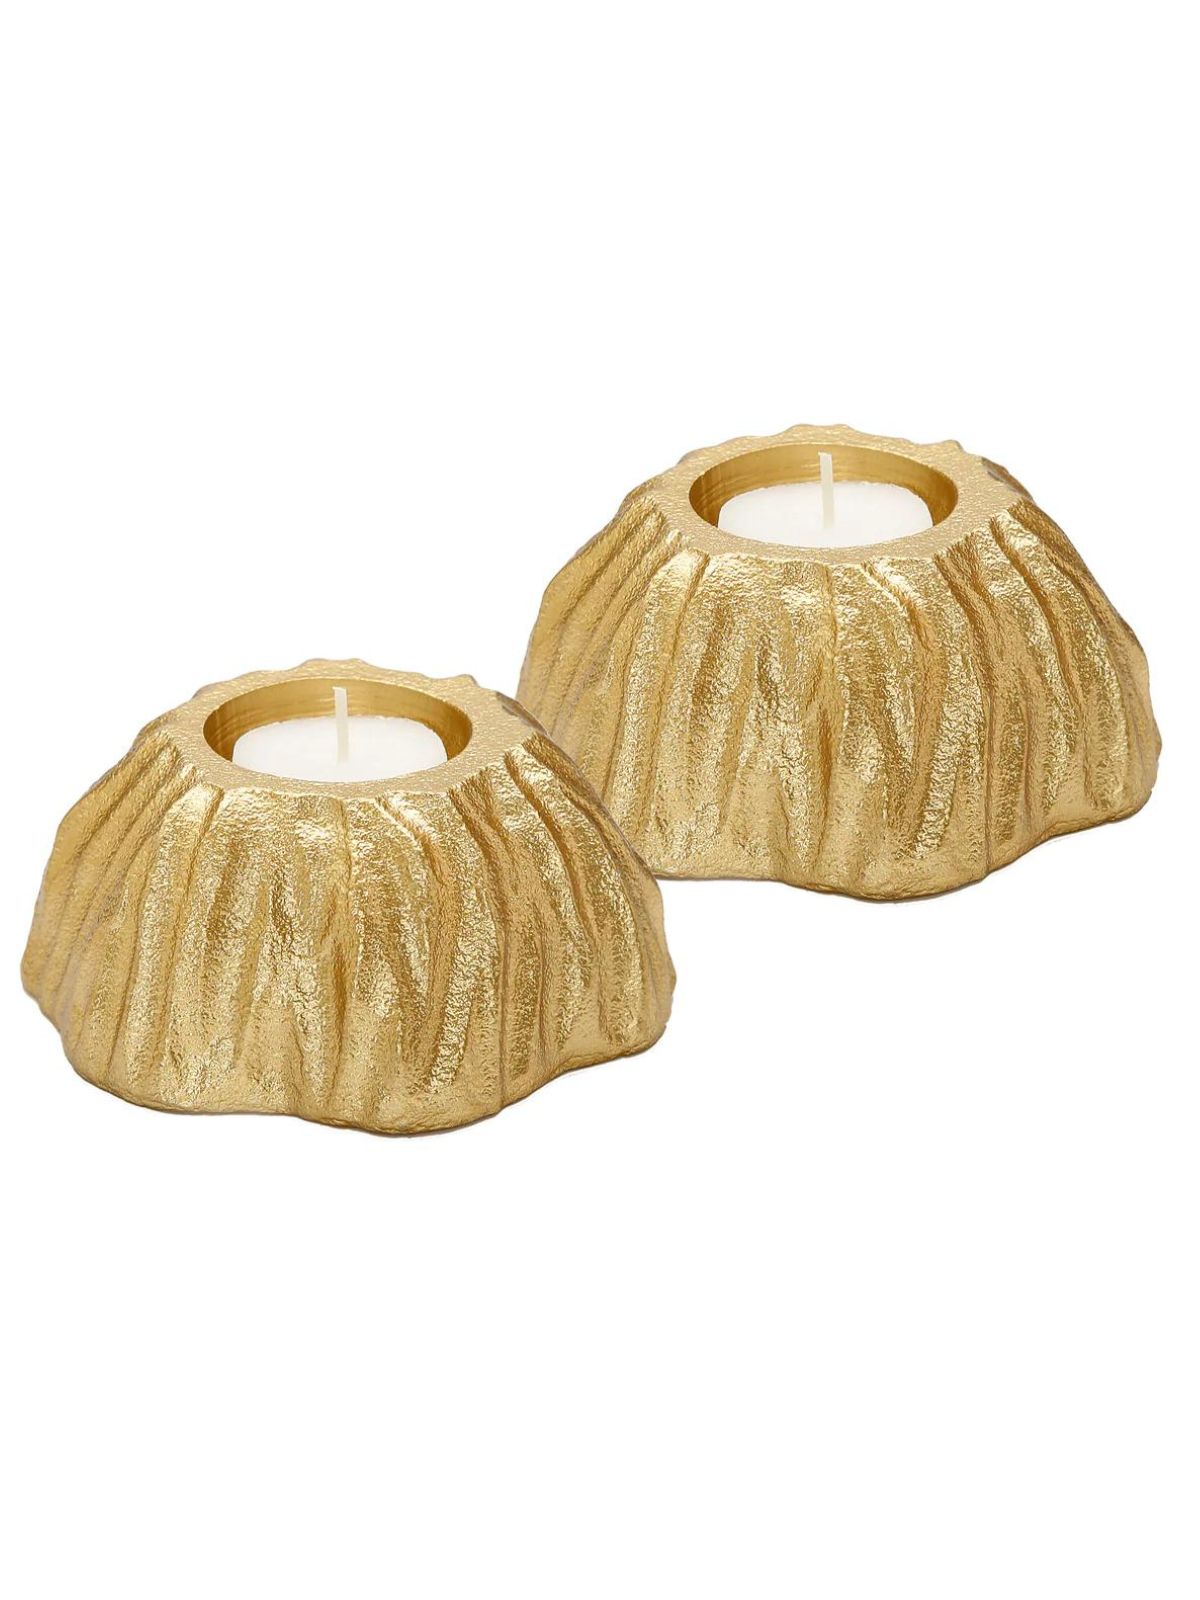 Set of 2 Gold Textured Brass Tea Light Candle holders, Measuring 4 inches each | KYA Home Decor. 